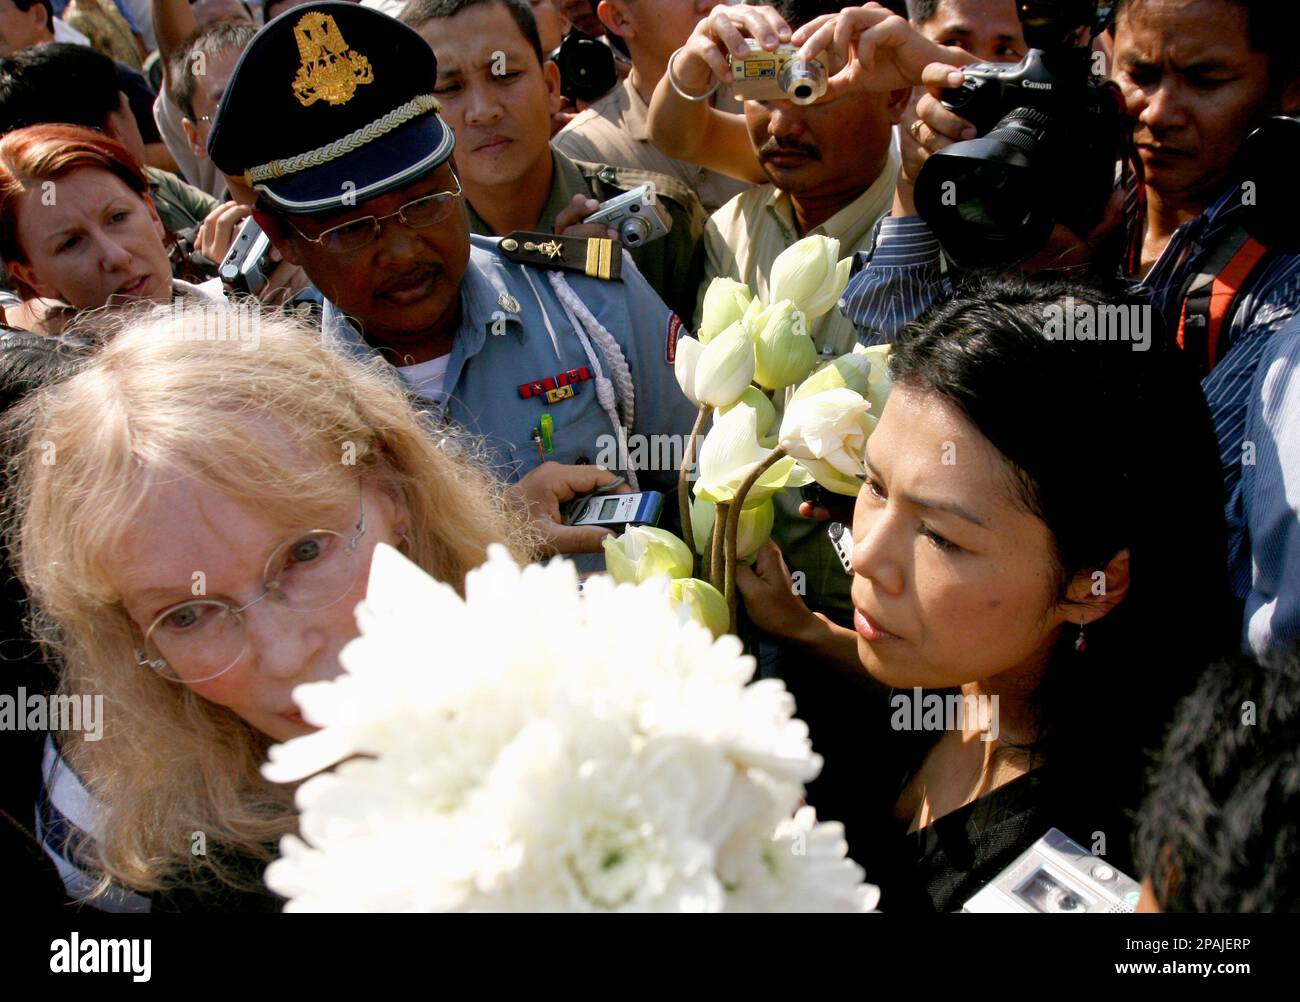 American actress Mia Farrow, left, and Theary Seng, right, Cambodian Executive Director of the Center for Social Development, move away after police pushing their group outside Tuol Sleng genocide museum in Phnom Penh, Cambodia, Sunday, Jan. 20, 2008. Cambodian police blocked Farrow from holding a genocide memorial ceremony Sunday at a Khmer Rouge prison, at one point forcefully pushing her group away from a barricade. (AP Photo/Heng Sinith) Stock Photo